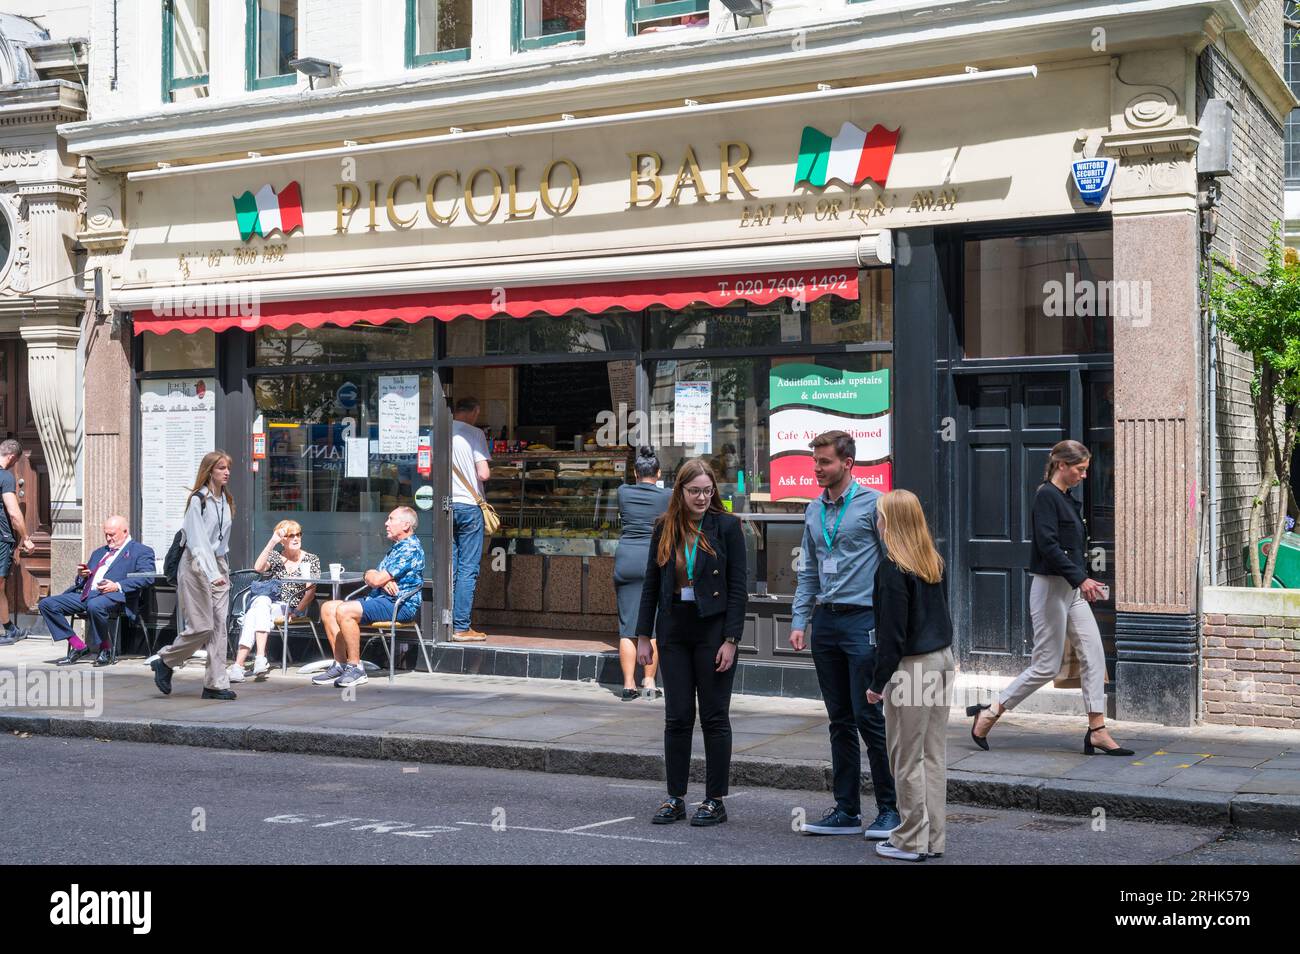 Exterior facade of Piccolo Bar. Italian bar and cafe on Gresham Street, City of London, England, UK. People walk by, others seated at pavement tables. Stock Photo